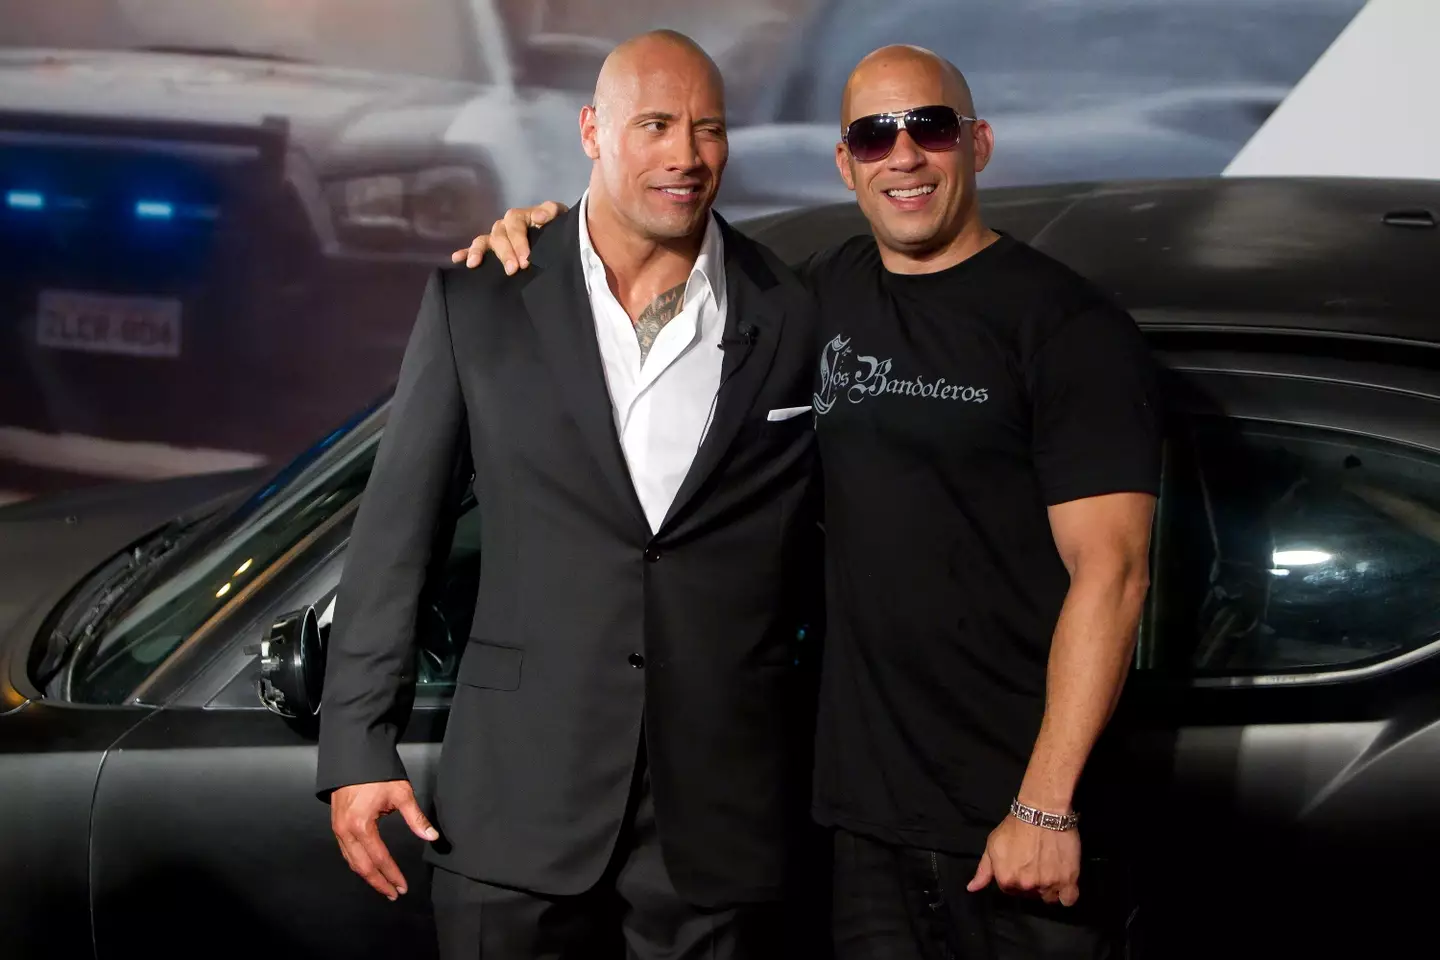 Rumors have been circulating for a while about Vin Diesel and Dwayne Johnson not always seeing eye-to-eye (Buda Mendes/LatinContent via Getty Images)